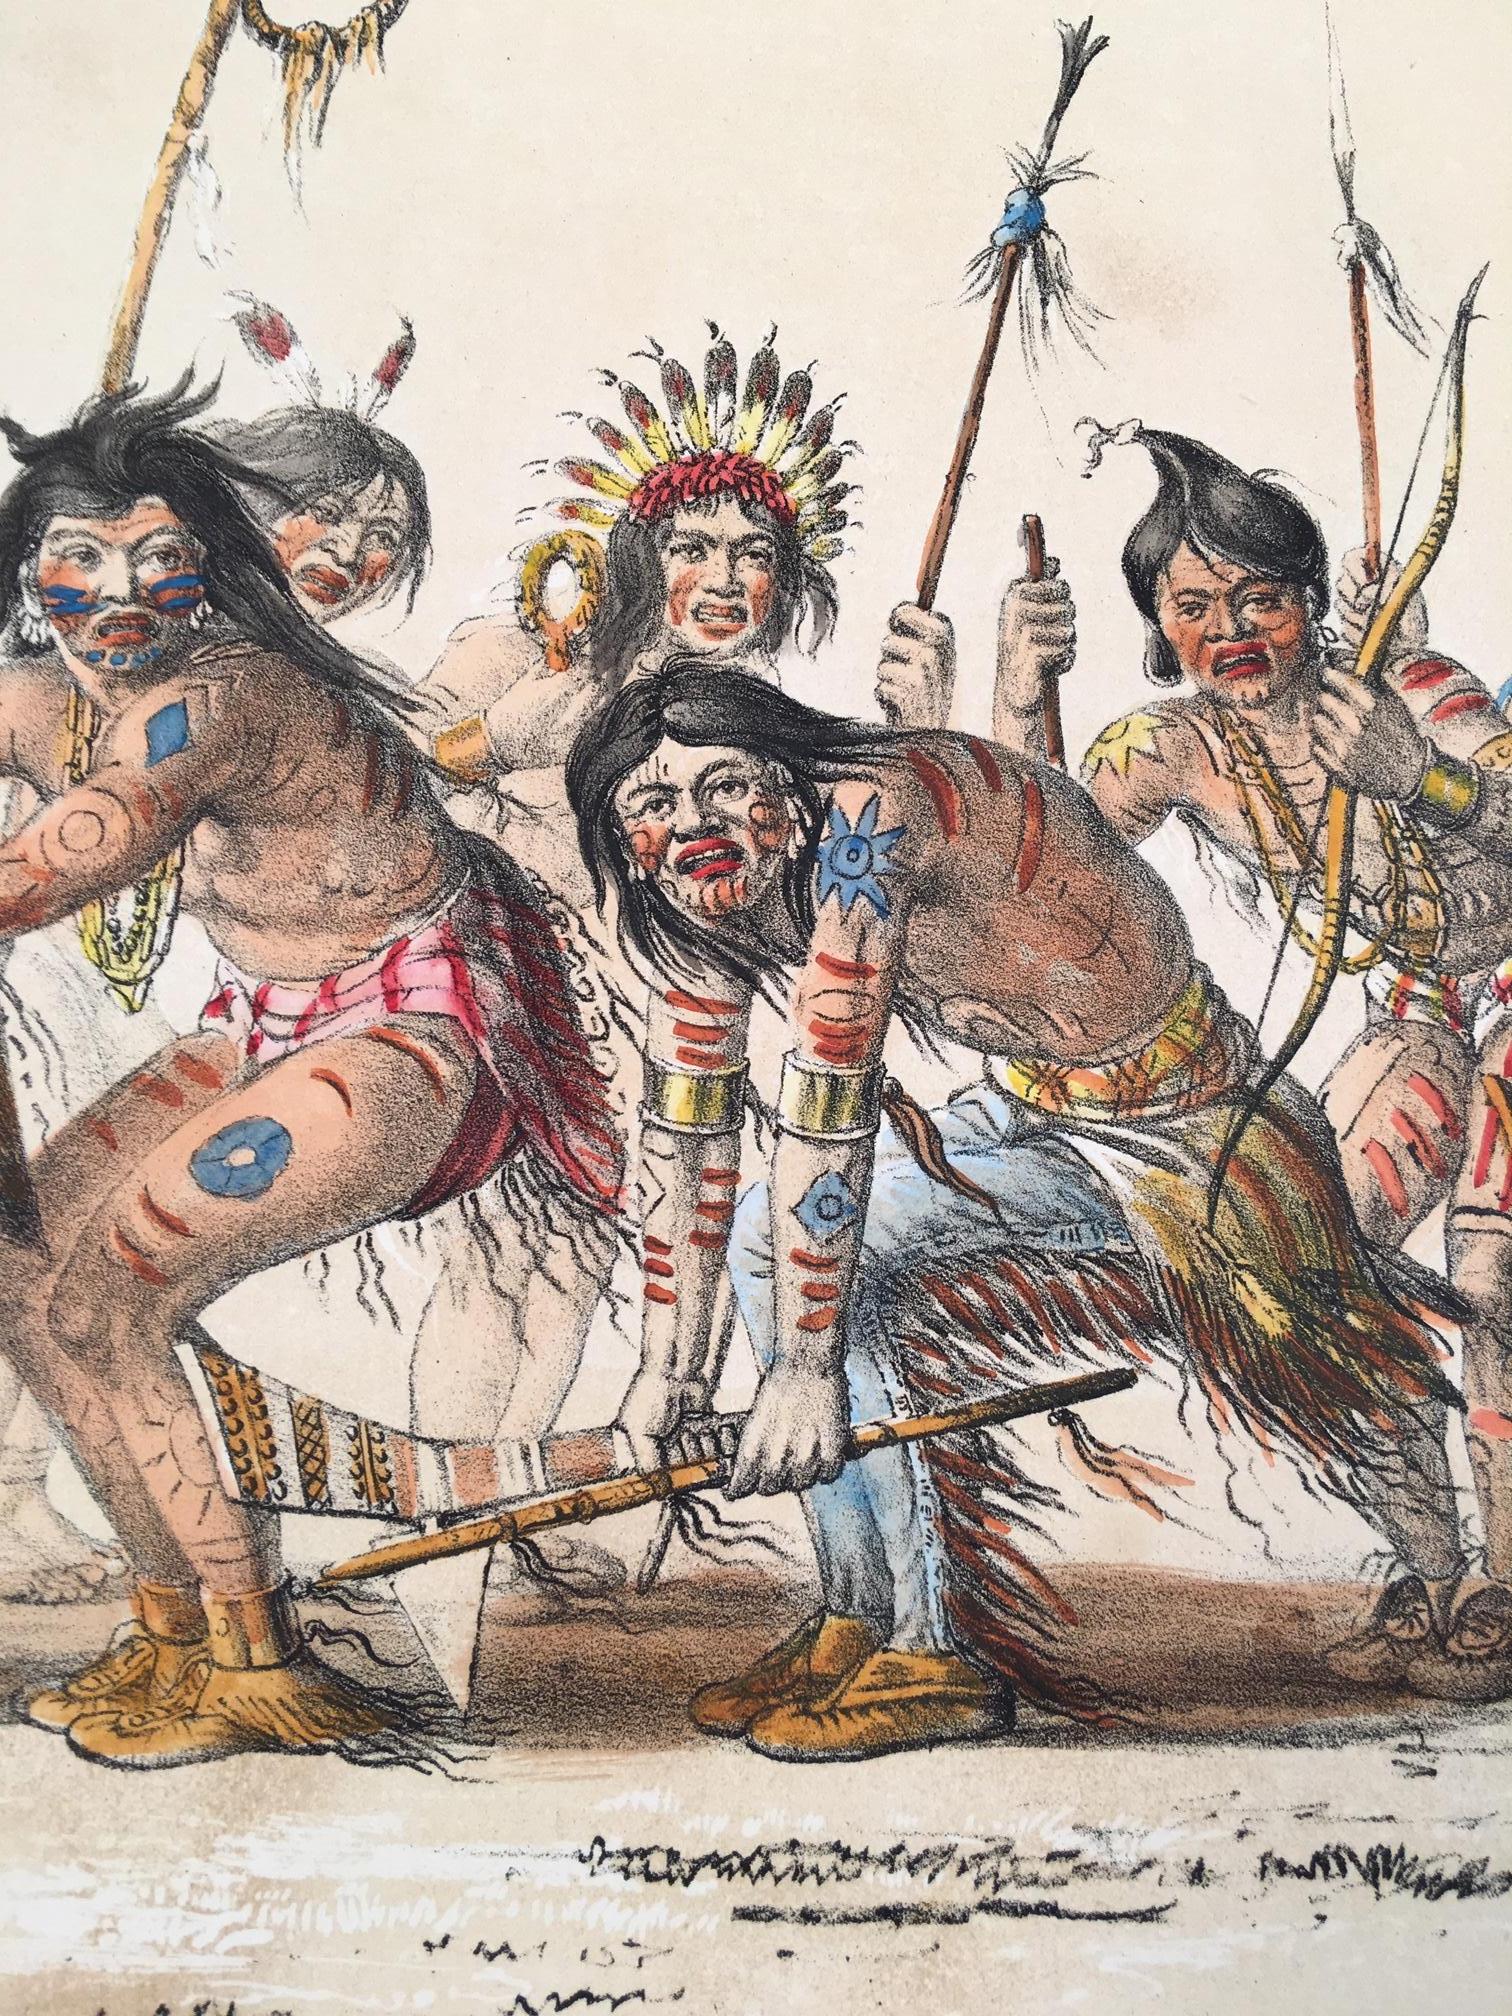 Lithograph  from George Catlin's  North American Indian Portfolio, hand-coloured, by John McGahey, printed by Day & Haghe. Wove paper. Image size: 11 x 16 1/2 inches. From Catlin's  historic 